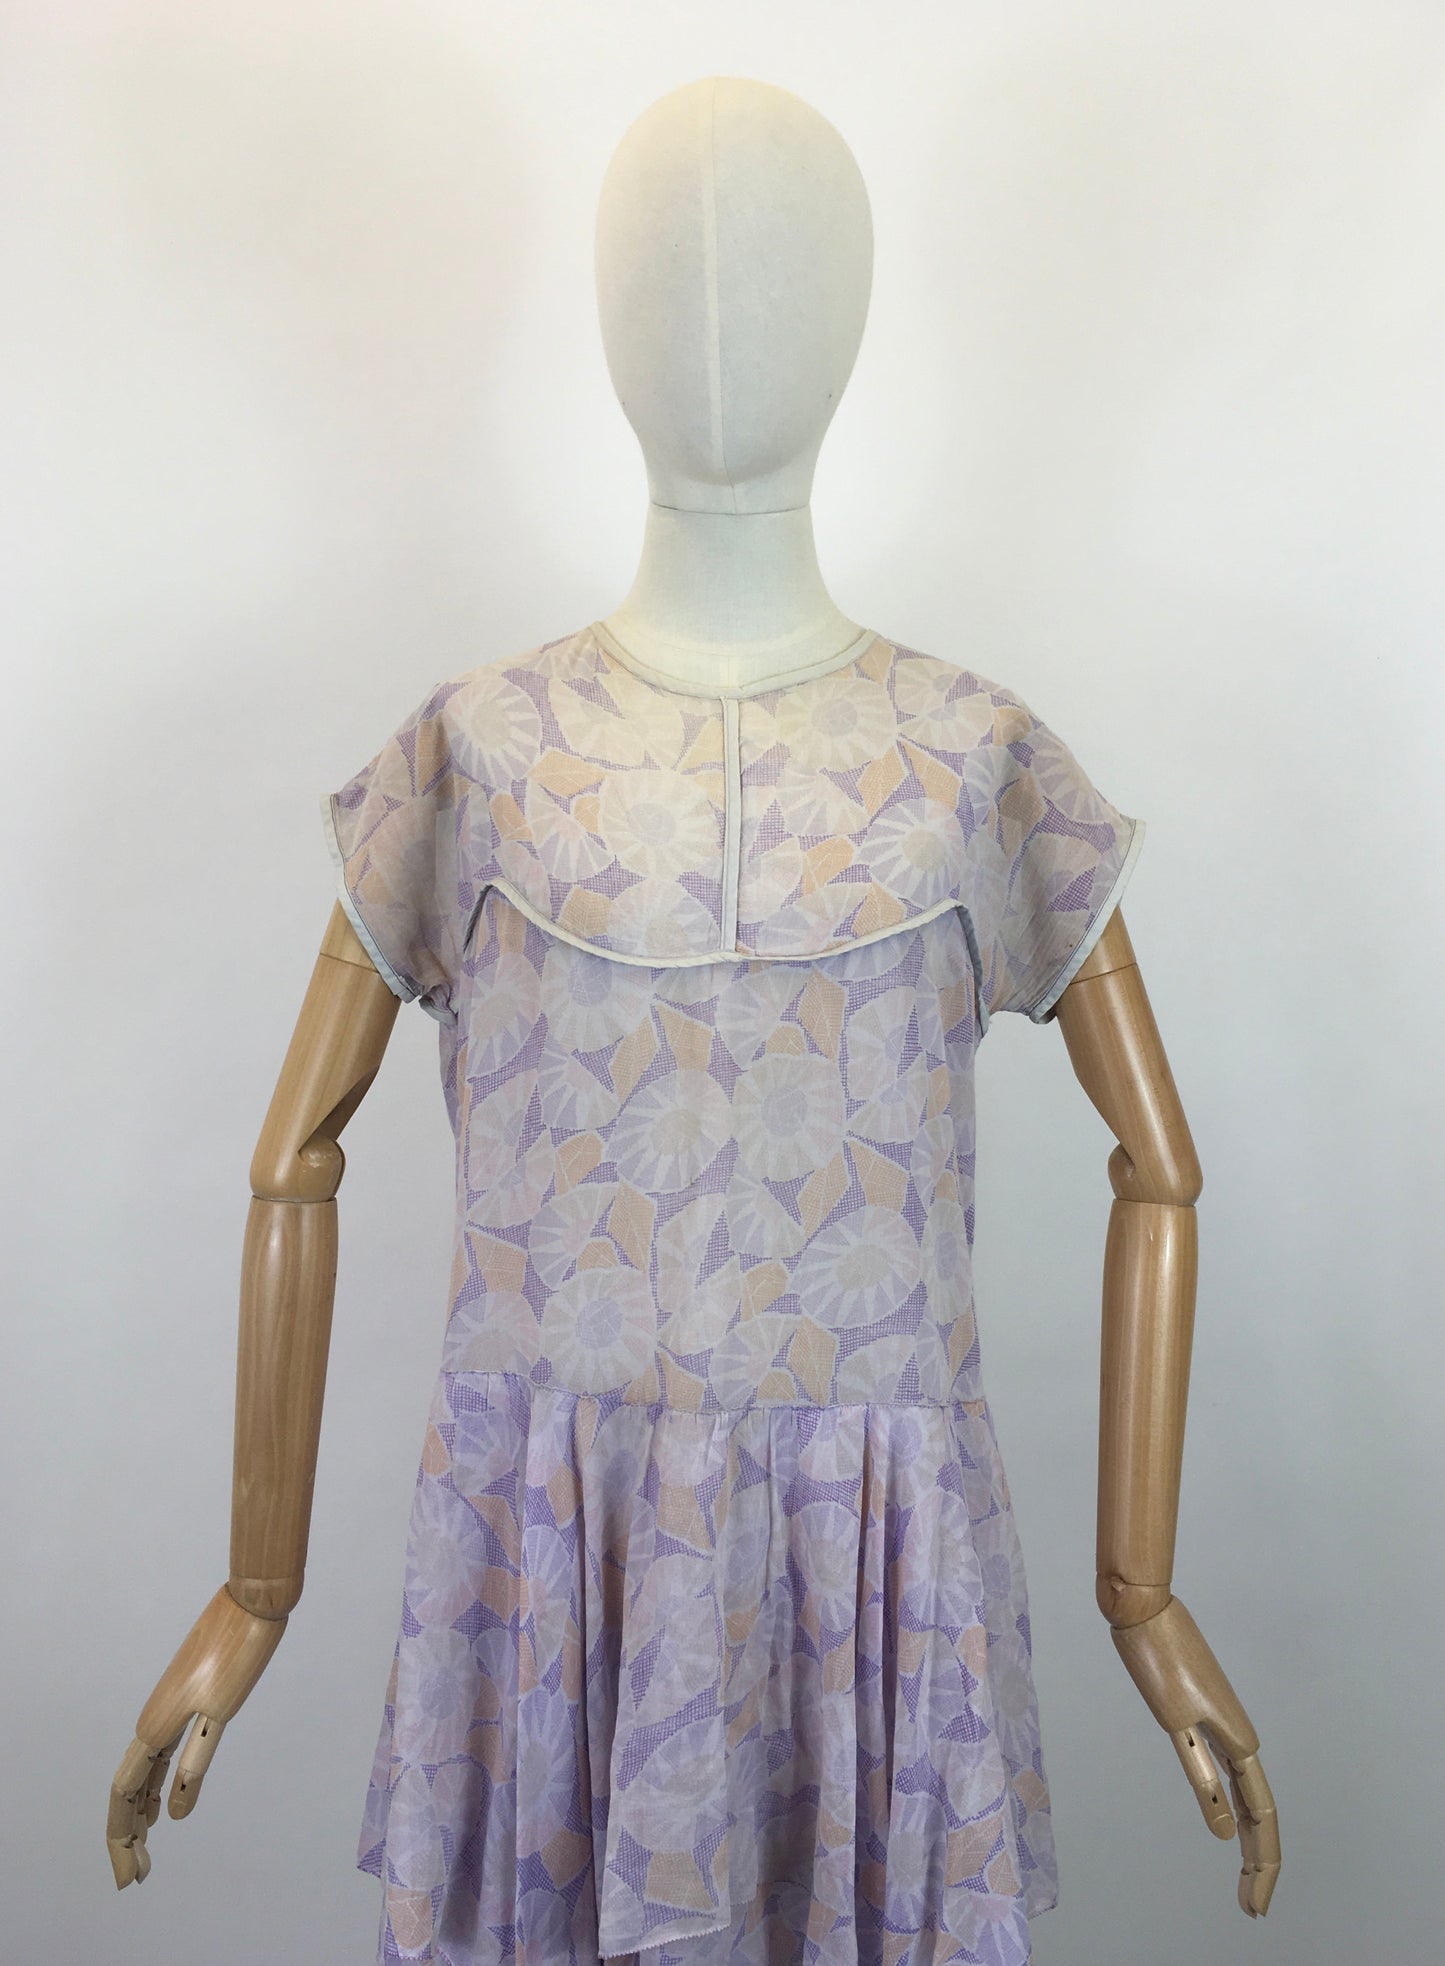 Original 1920's Charming Cotton Lawn Day Dress - In Deco Pastels of Lilacs, Pinks & Orange